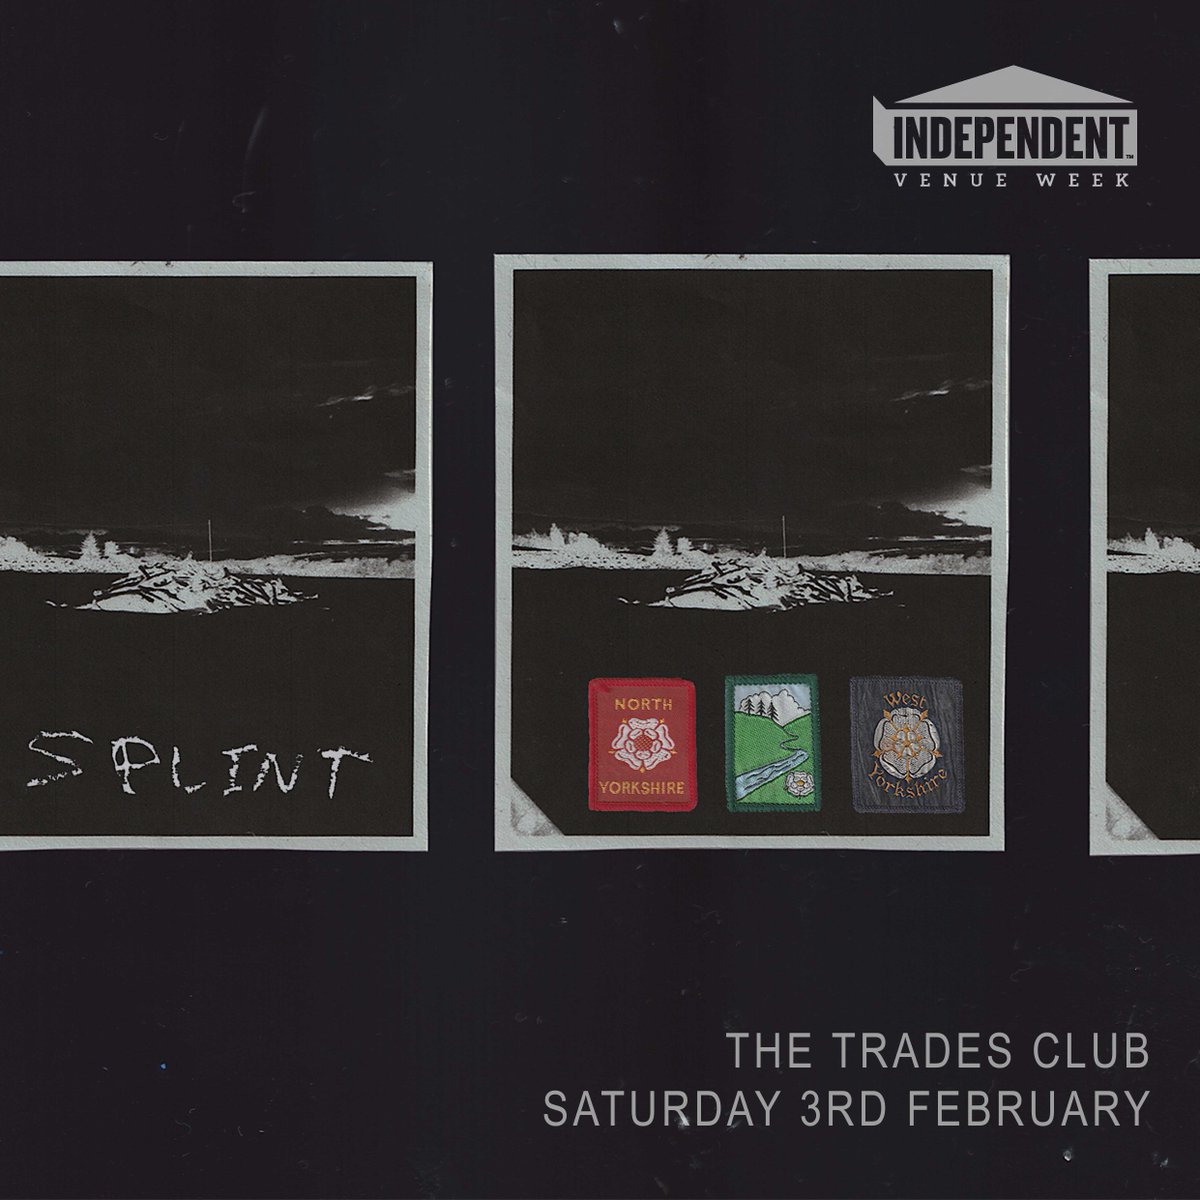 New show: @thisissplint play a special headline @IVW_UK show at @thetradesclub on Saturday 3rd February. Tickets now on sale HERE >> thetradesclub.com/events/splint2